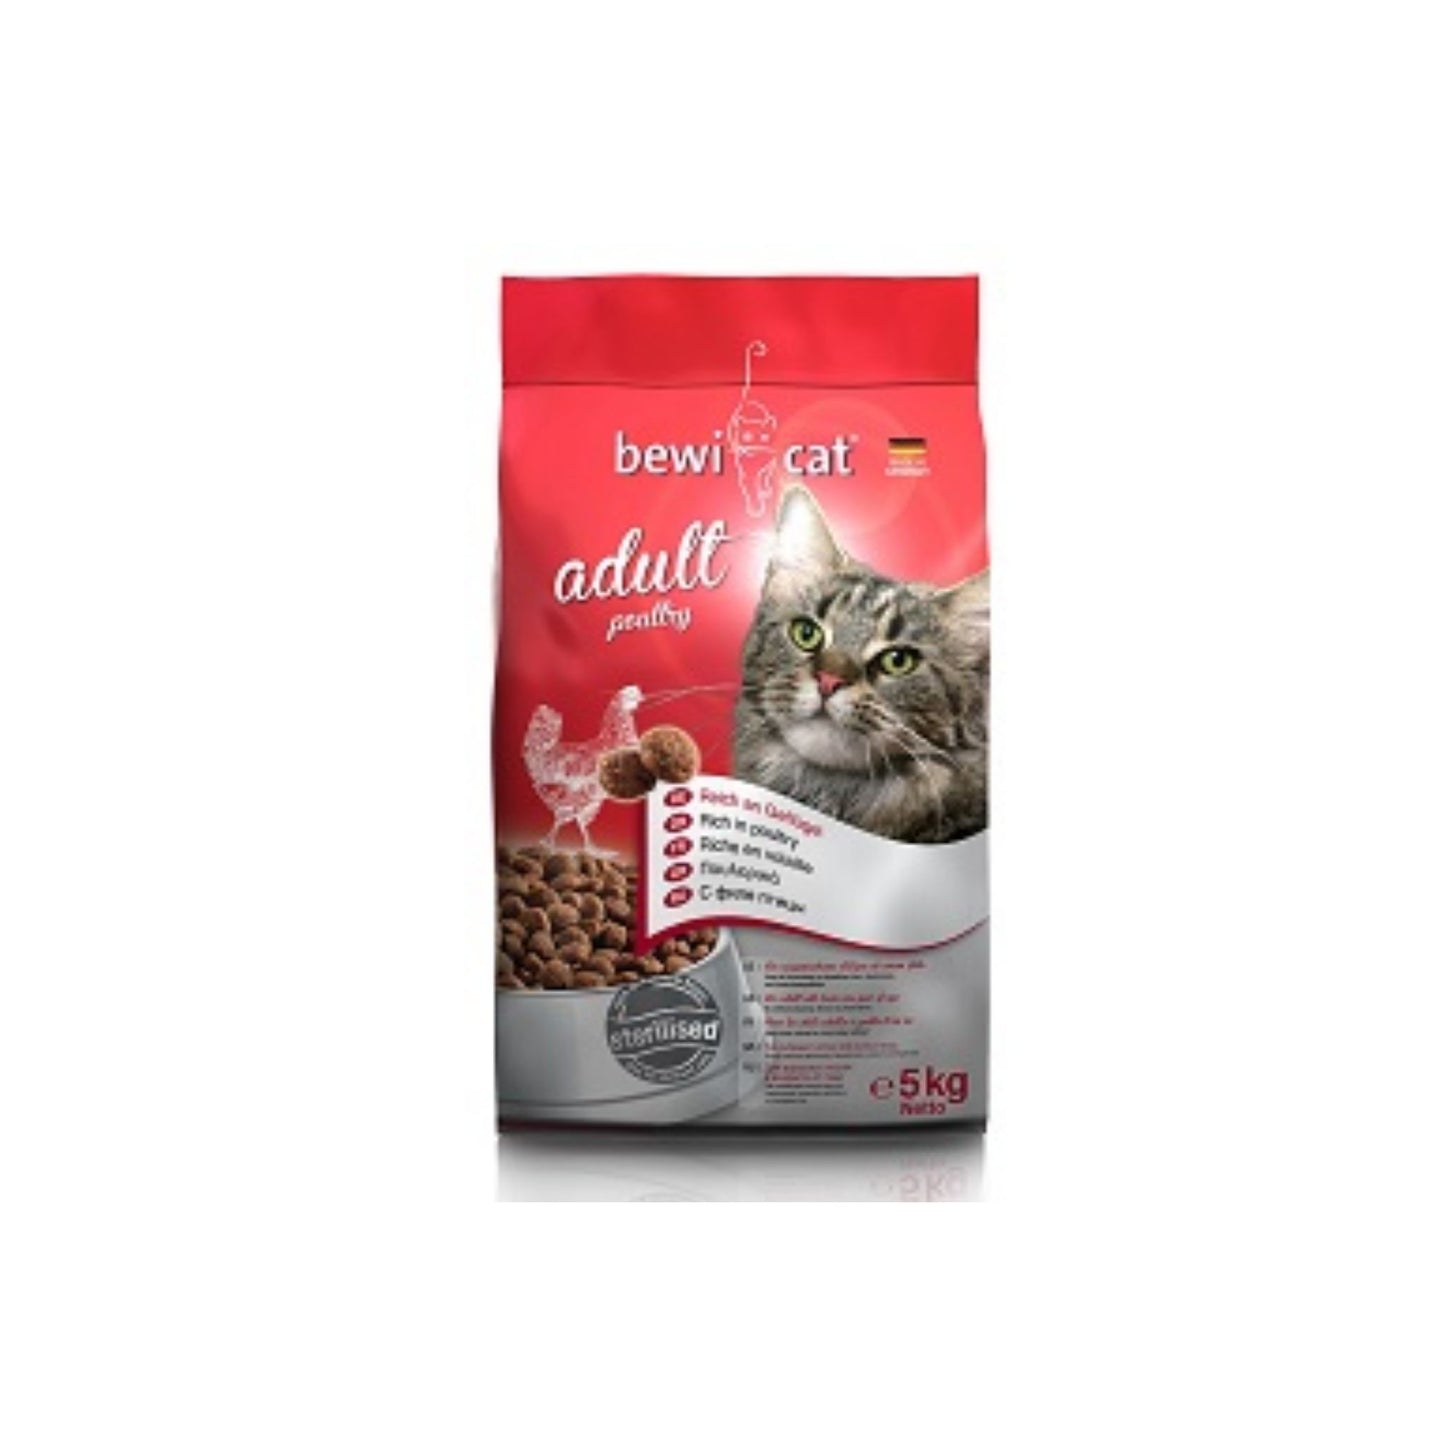 Bewi-Cat Adult Poultry 5kg  Angebot im Mai